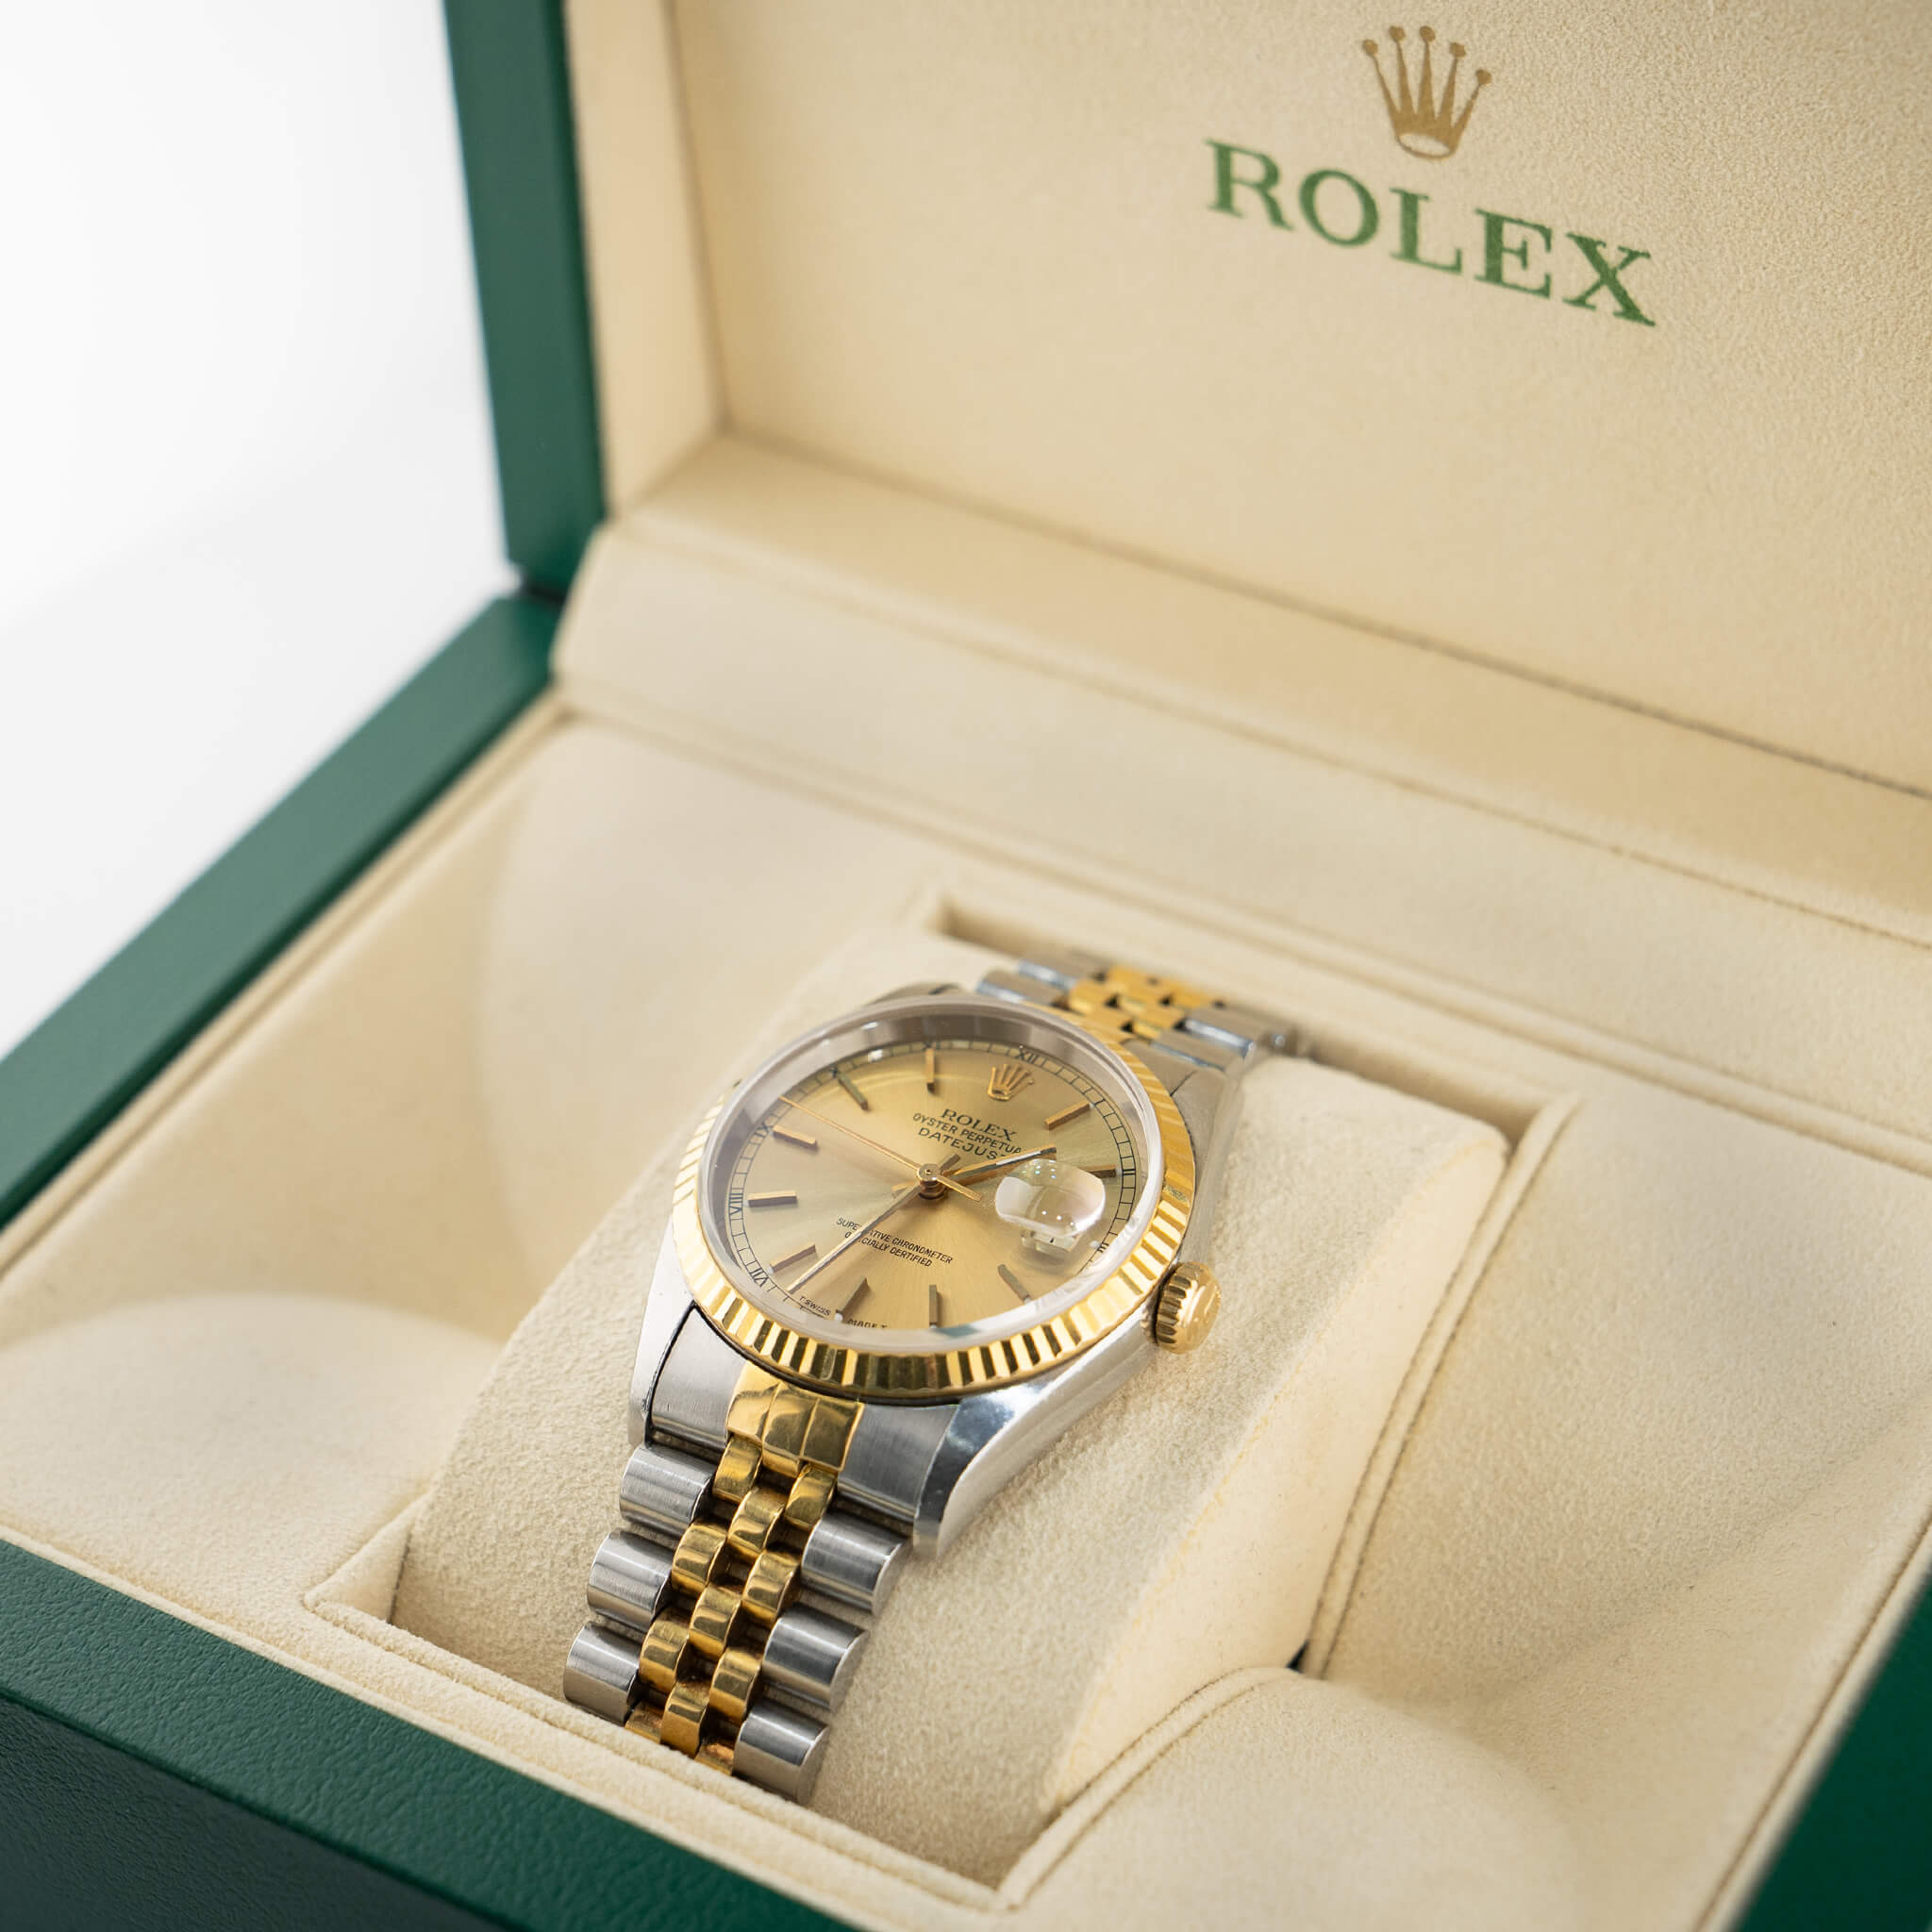 ROLEX DATEJUST 36MM CHAMPAGNE DIAL 1995